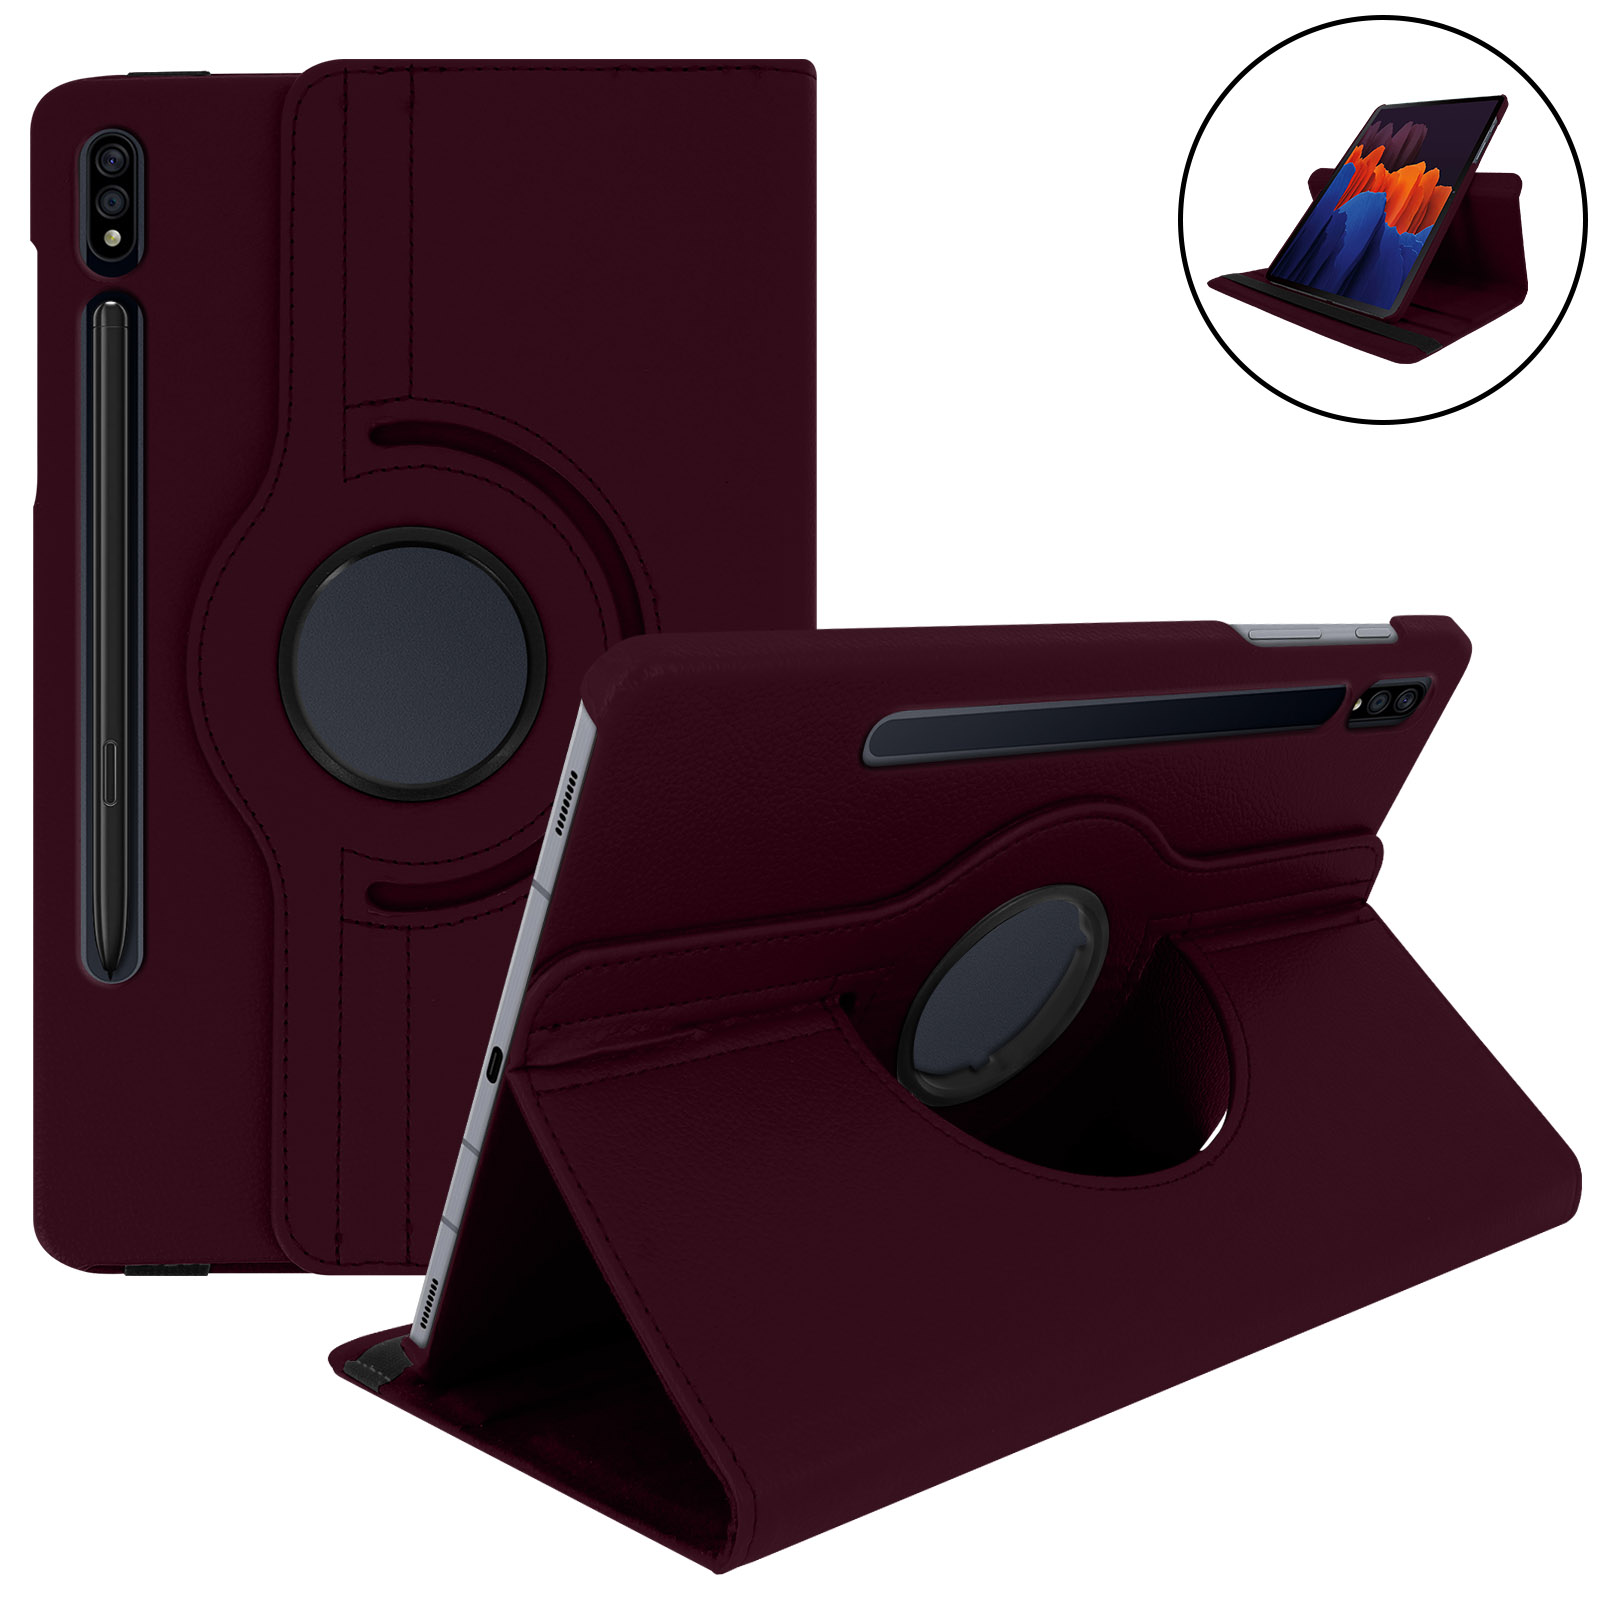 Coques et accessoires Samsung Galaxy Tab S8 - Casewear